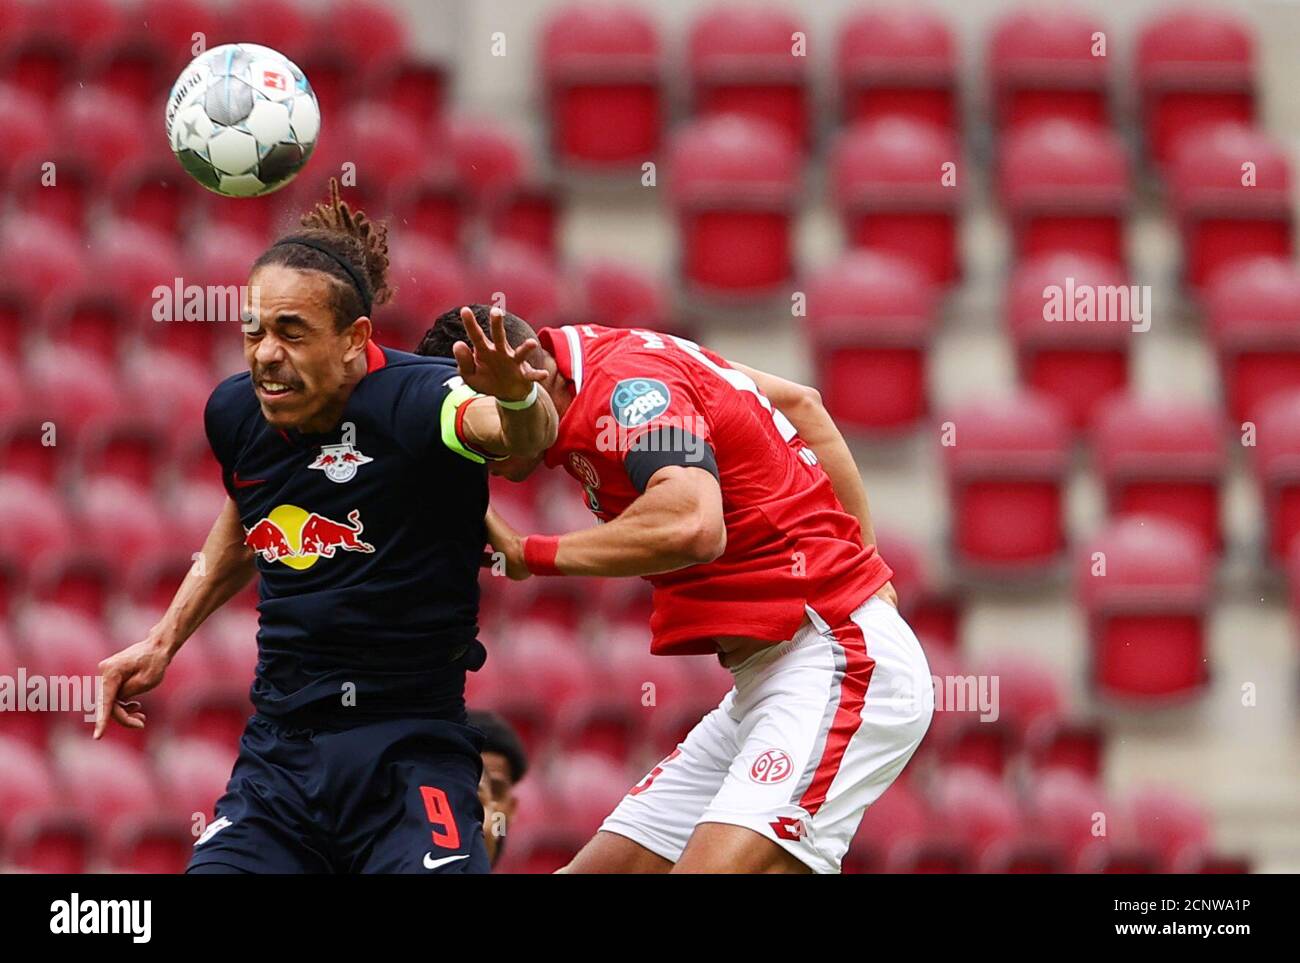 Soccer Football - Bundesliga - 1. FSV Mainz 05 v RB Leipzig - Opel Arena, Mainz, Germany - May 24, 2020  RB Leipzig's Yussuf Poulsen in action, as play resumes behind closed doors following the outbreak of the coronavirus disease (COVID-19) REUTERS/Kai Pfaffenbach/Pool  DFL regulations prohibit any use of photographs as image sequences and/or quasi-video Stock Photo